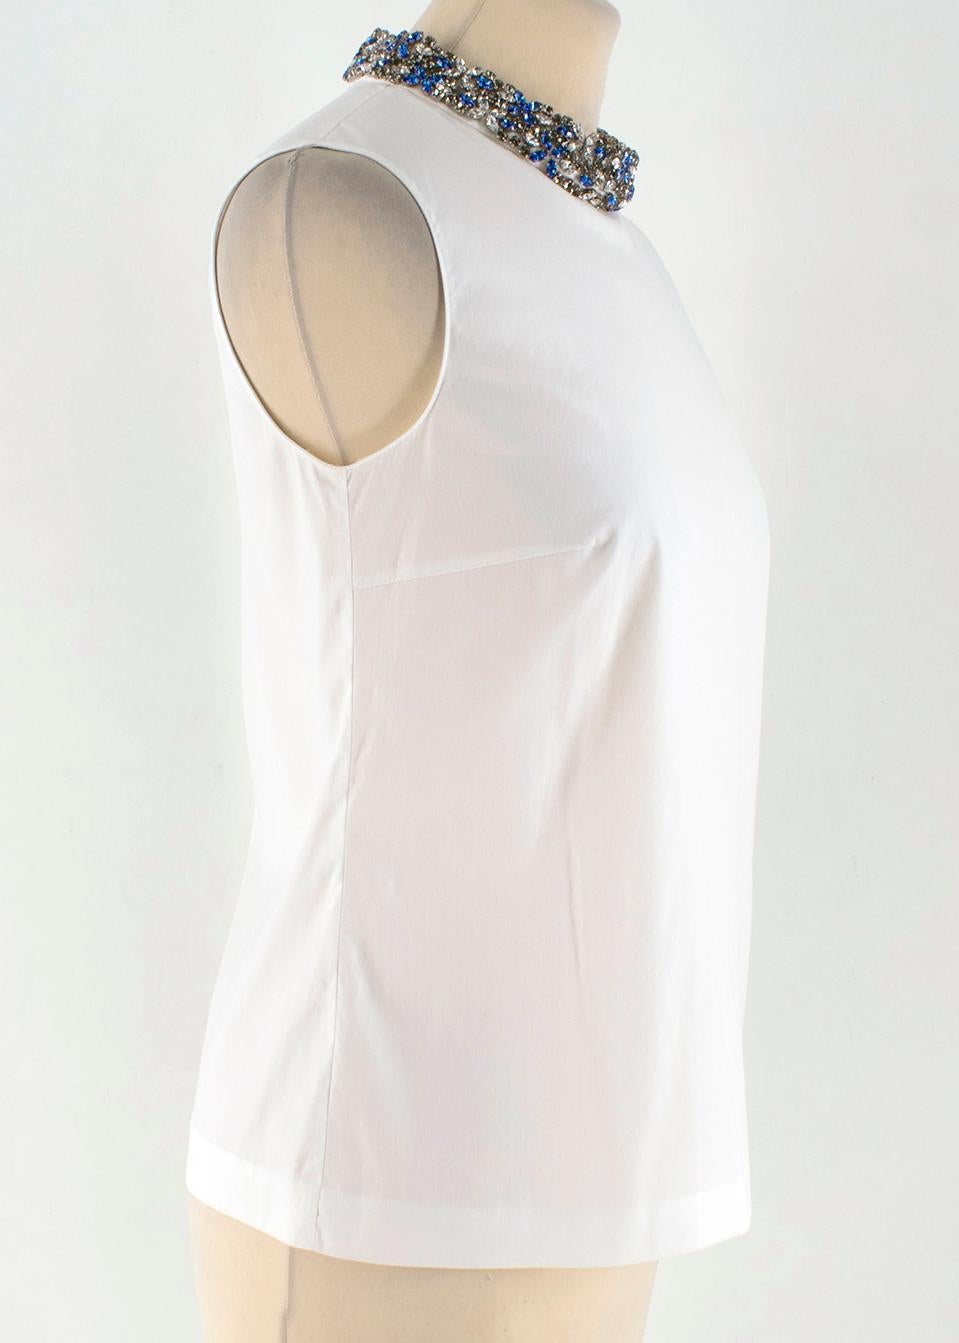 Prada White Sleeveless Top with Crystal Collar

- Hidden back zipper with hook
- Diamond collar 
- Made in Italy

Please note, these items are pre-owned and may show signs of being stored even when unworn and unused. This is reflected within the